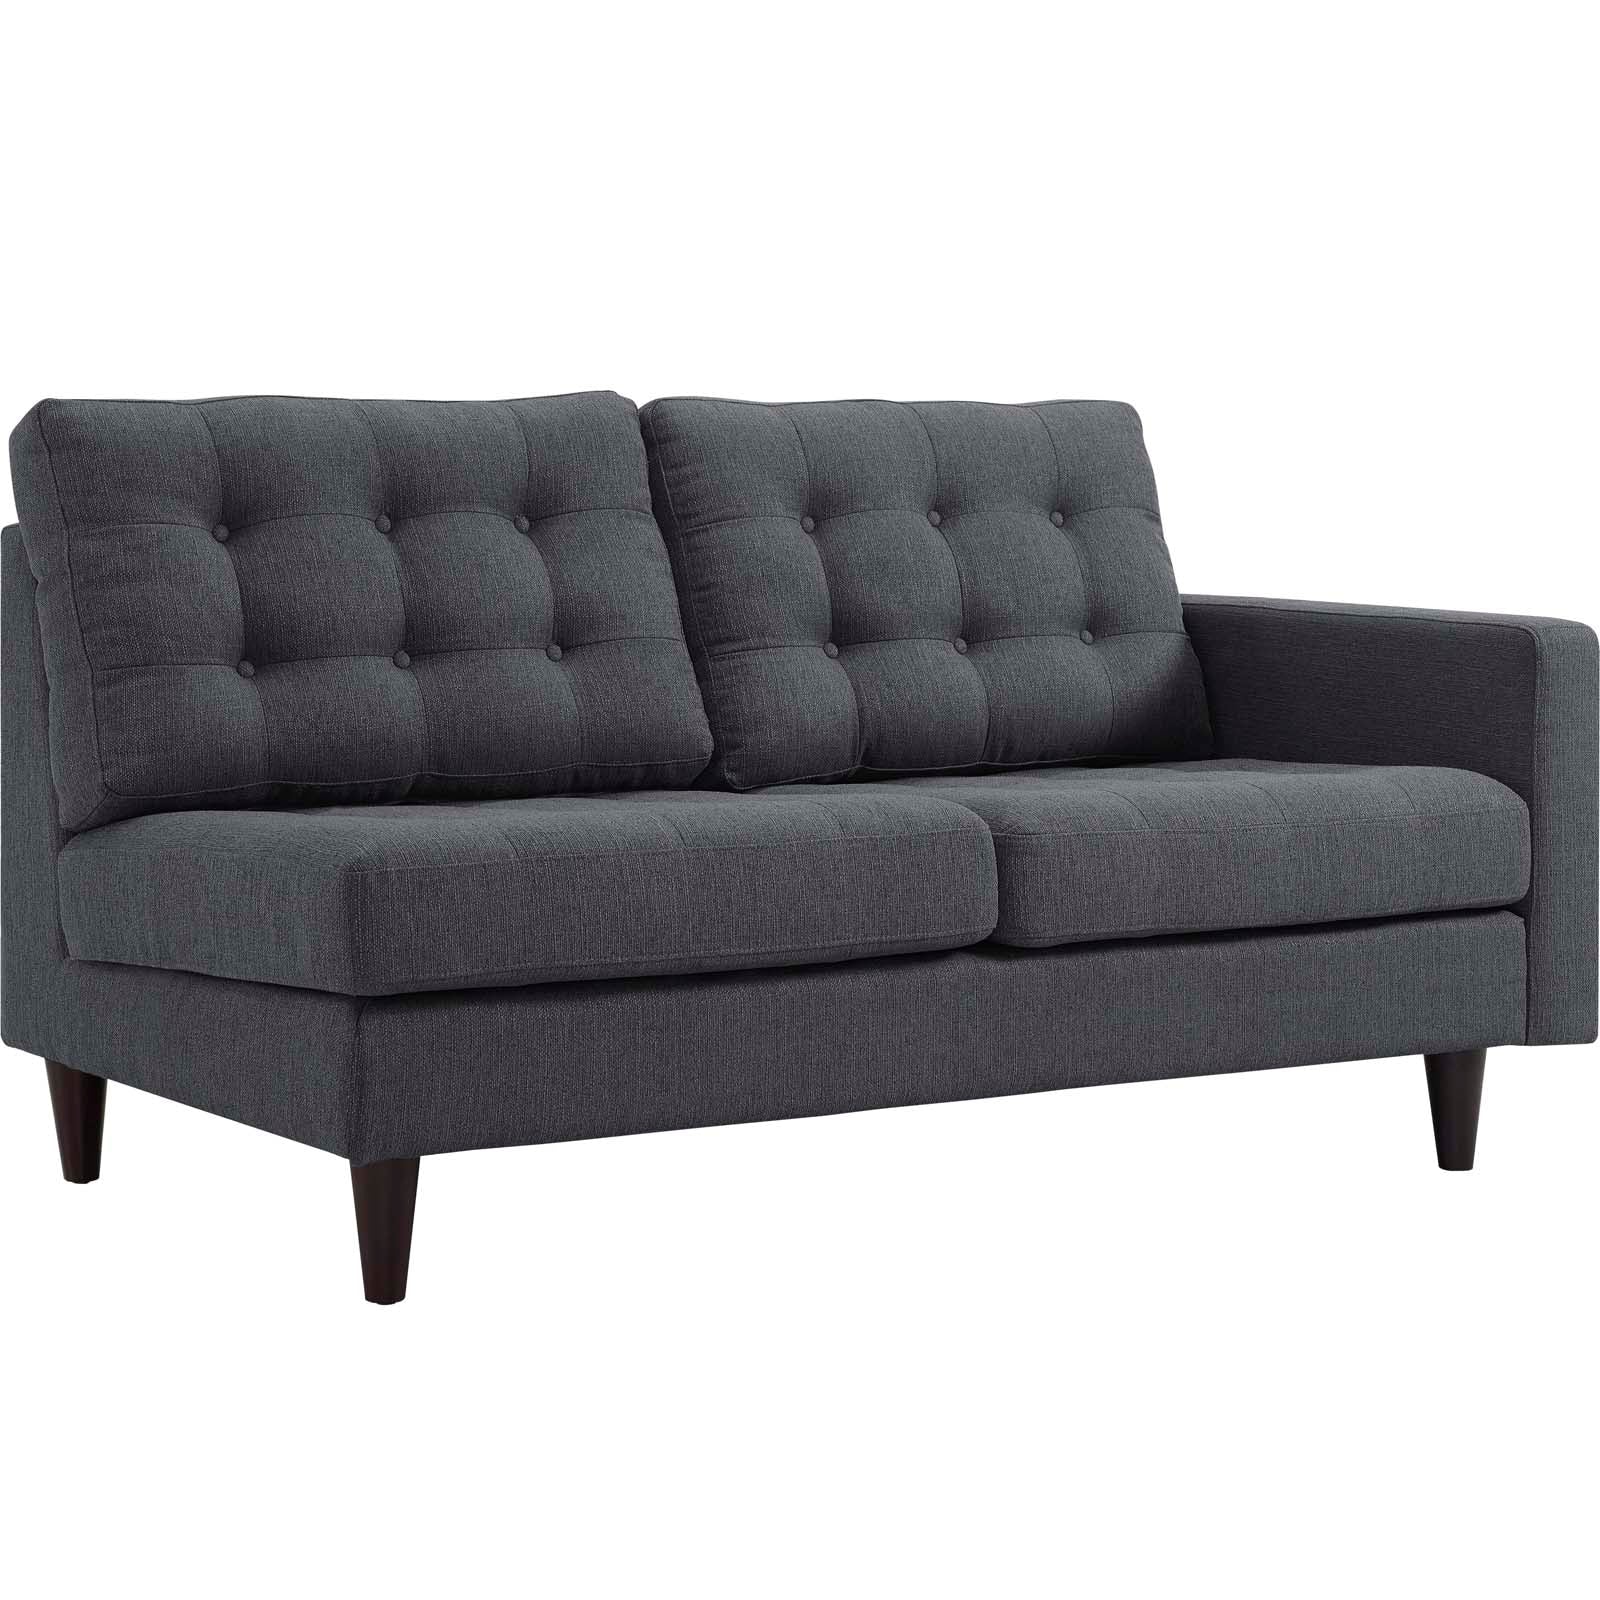 Empress Right-Facing Upholstered Fabric Loveseat - East Shore Modern Home Furnishings